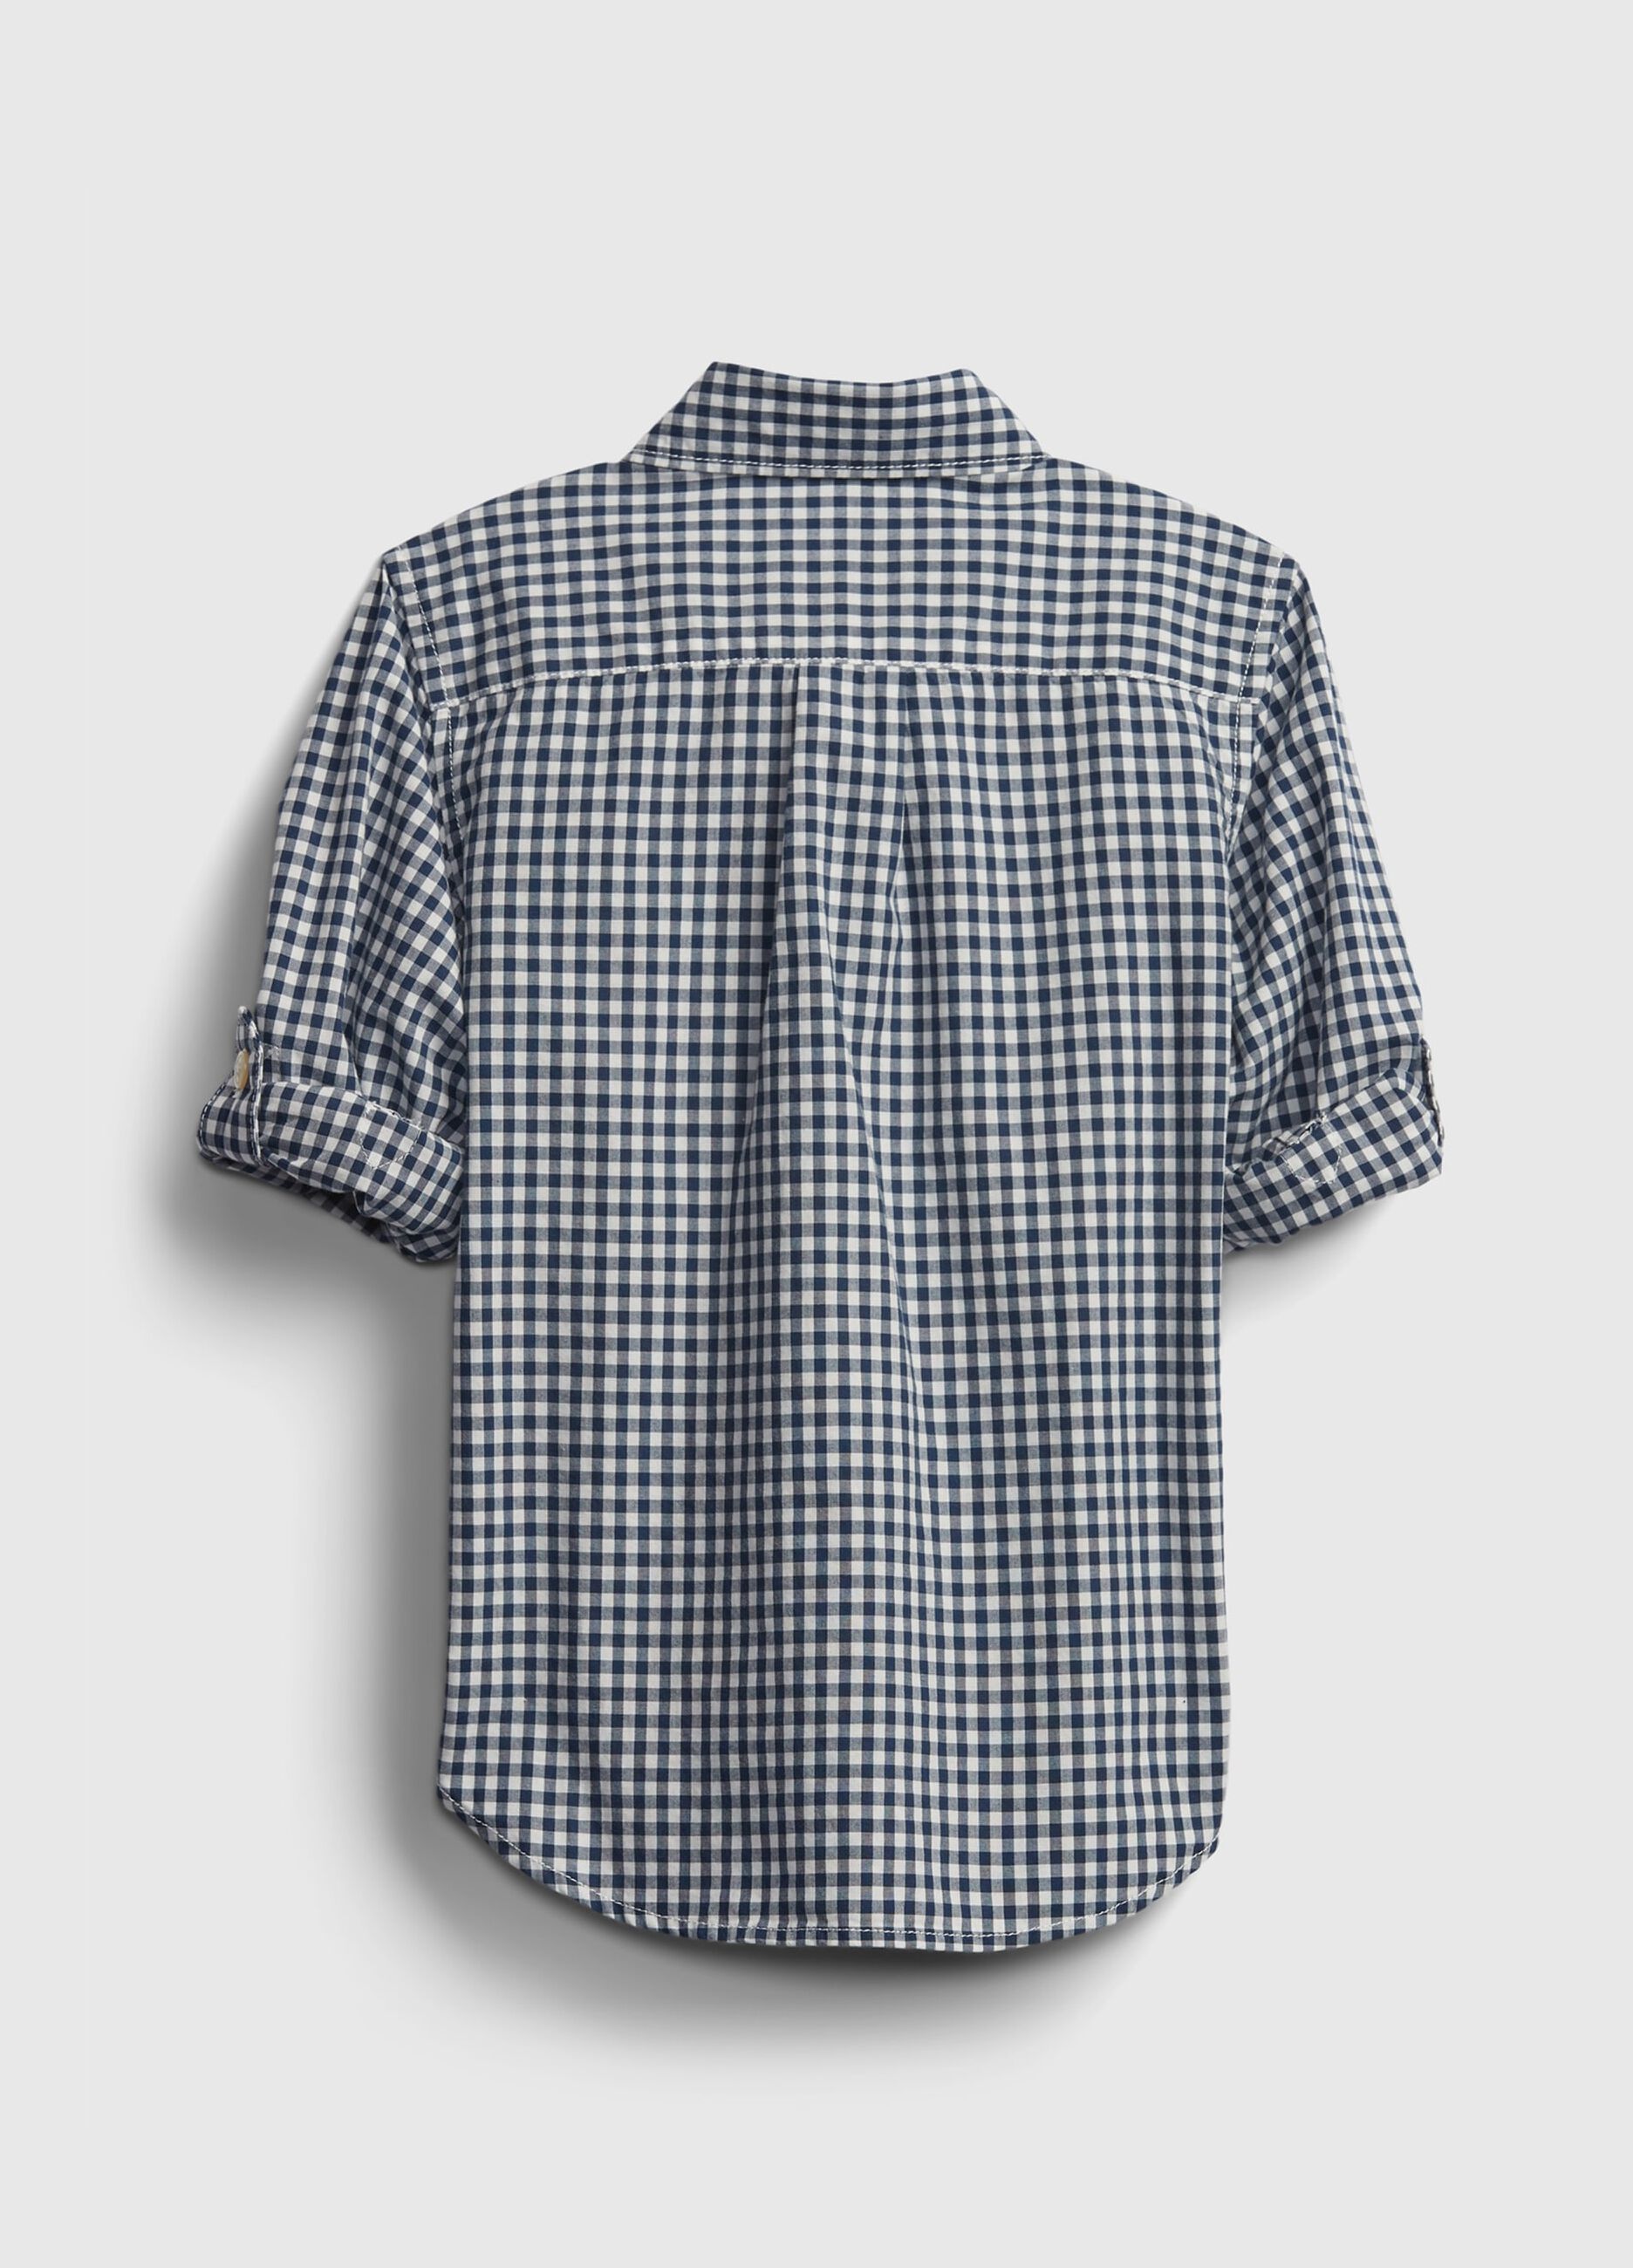 Cotton shirt with gingham pattern